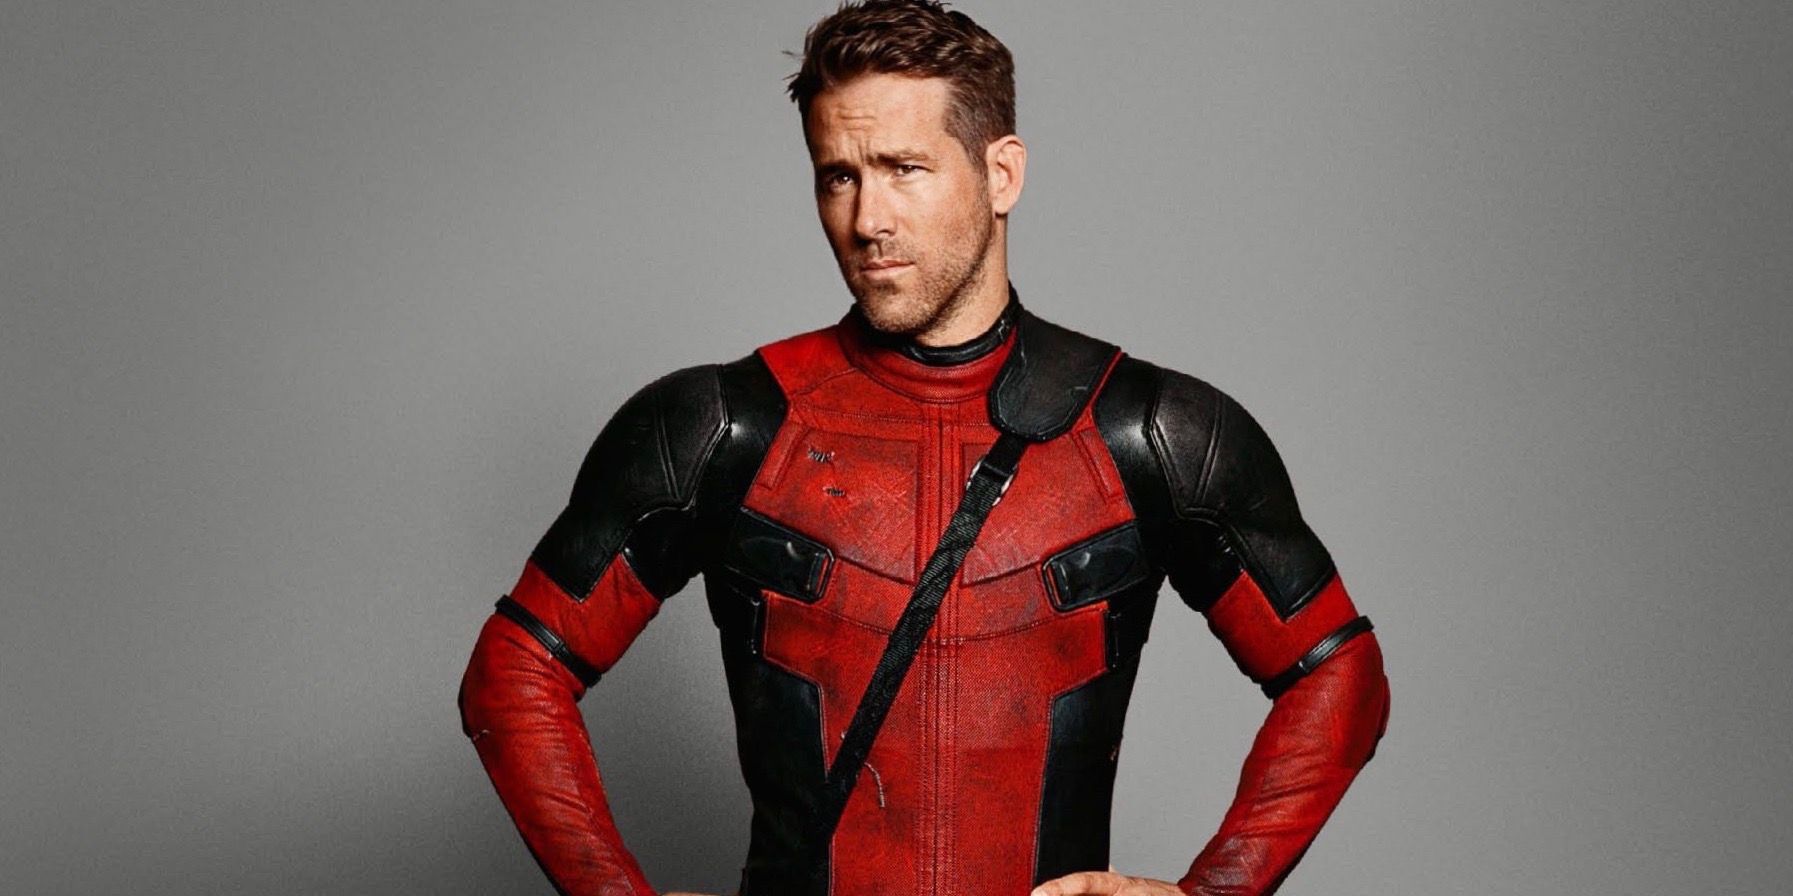 Ryan Reynolds Deadpool Workout Routine - How to get ripped 